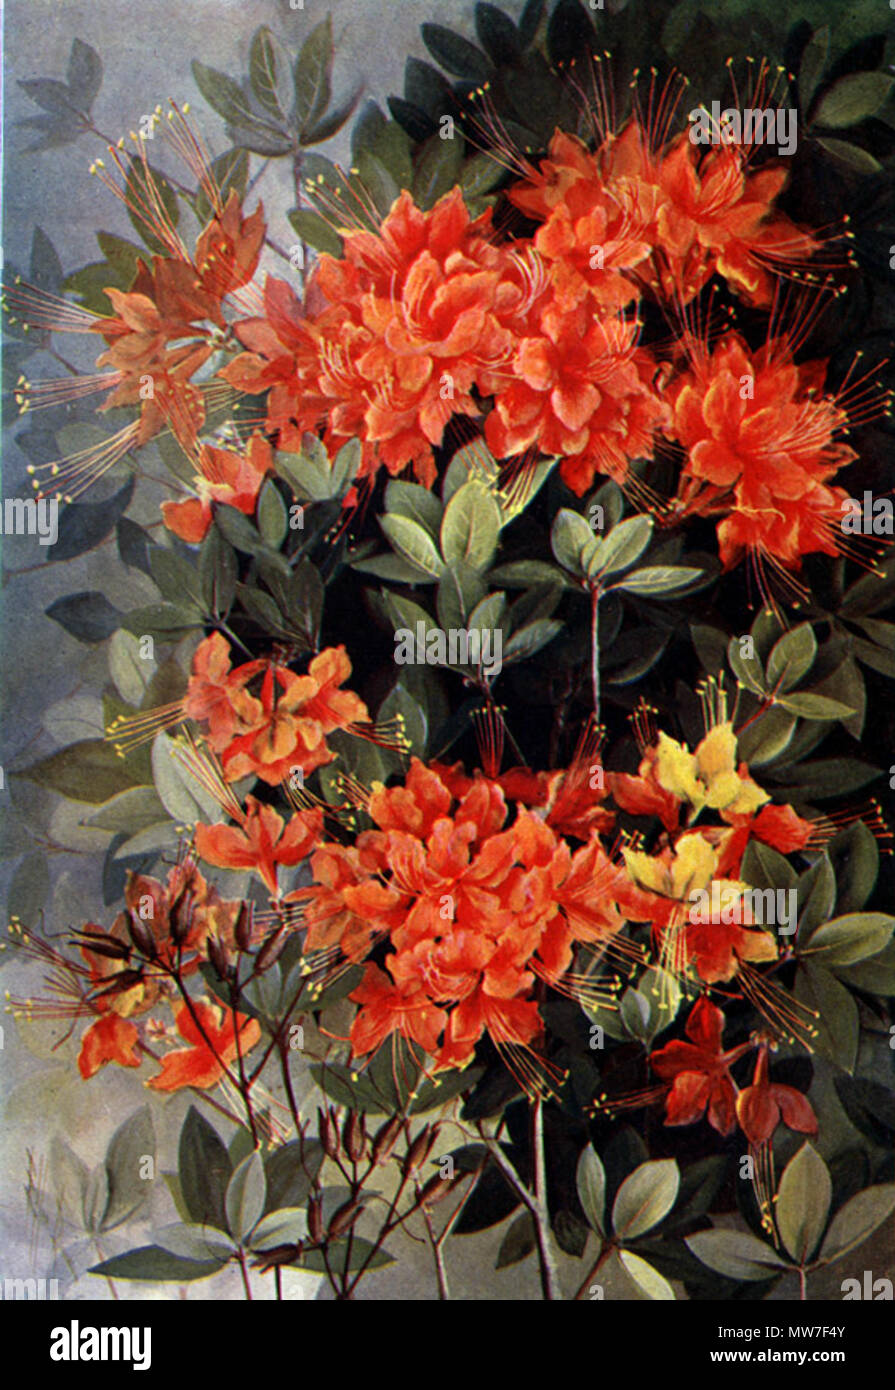 . Flame Azalea, Rhododendron calendulaceum offset color reproduction of painting . 1901. Alice Lounsberry (author, 1872-1949), Ellis Rowan (artist, 1847 - 1922), see English Wikipedia article 519 Rhododendron calendulaceumCDP119A Stock Photo